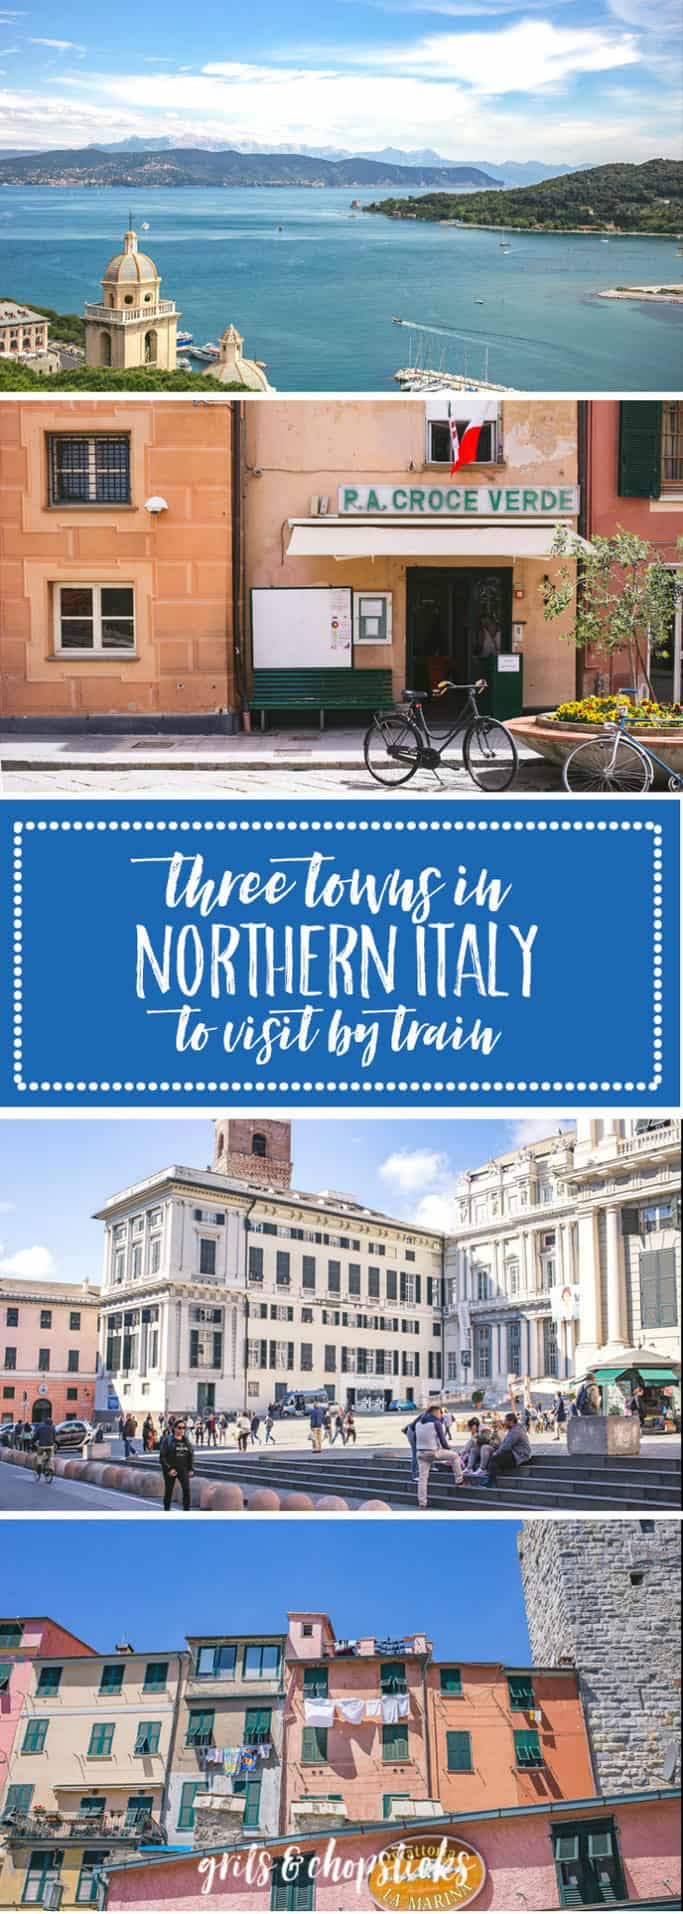 three towns in northern italy to travel to by train